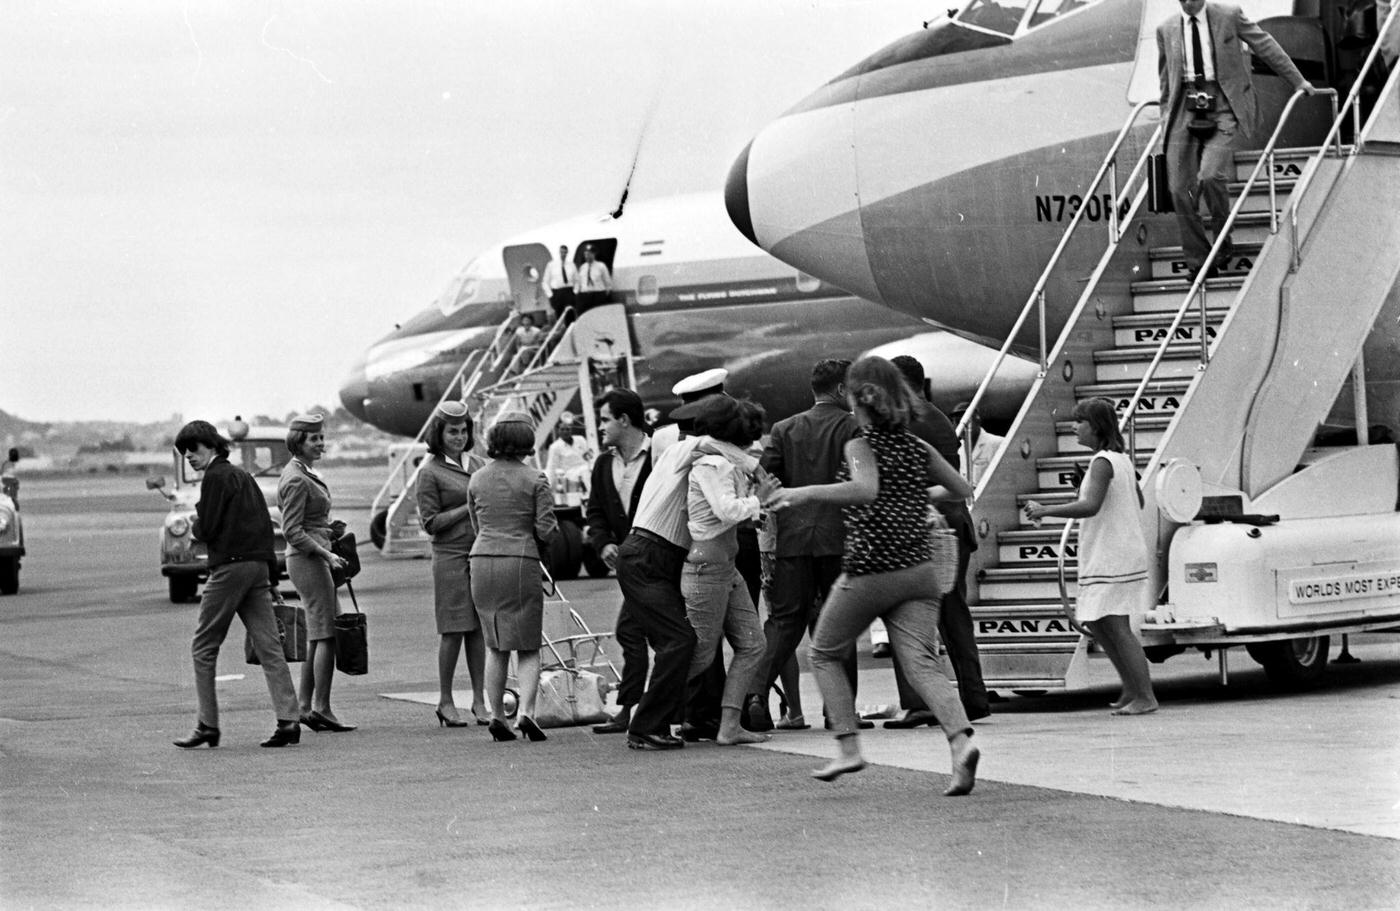 The Rolling Stones arrive at Mascot Airport for their 1965 Australian tour, January 21 1965.